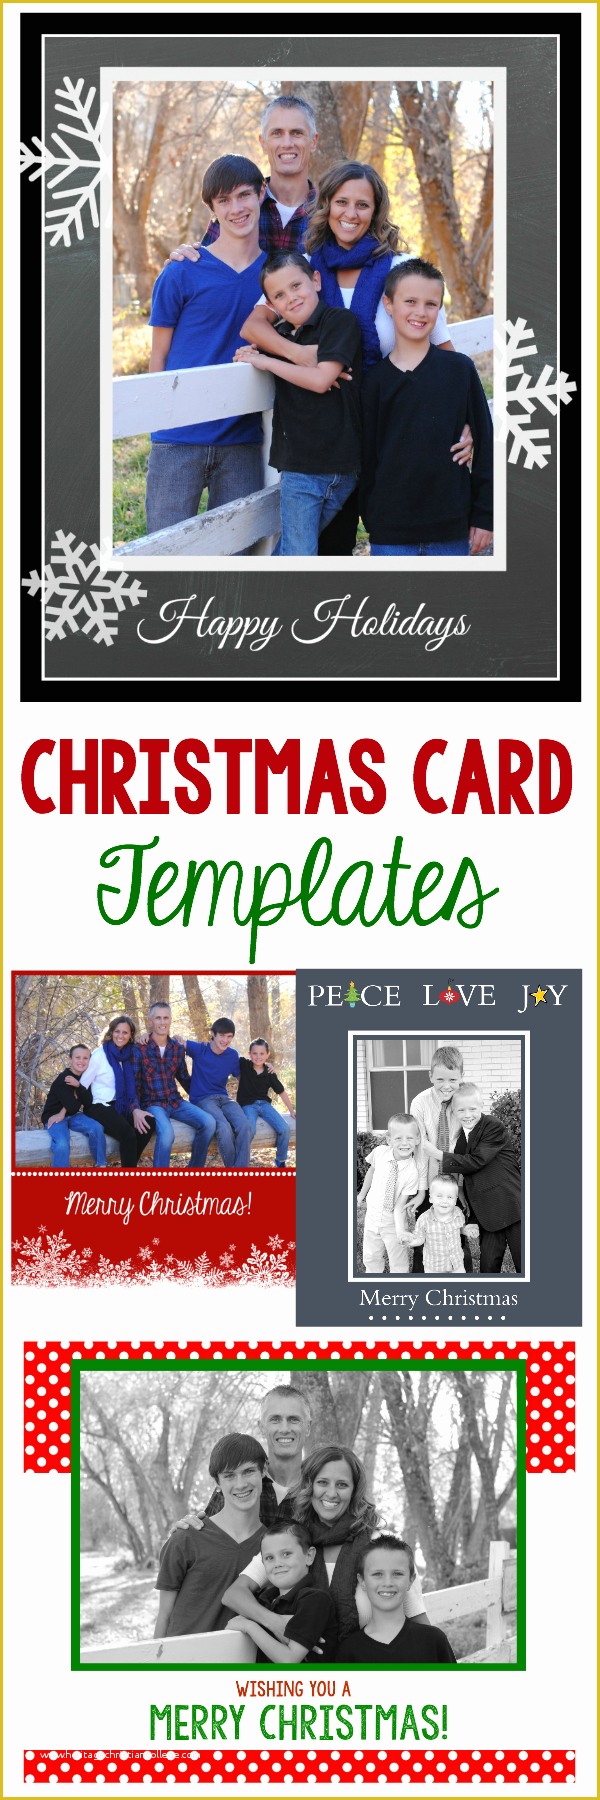 Free Christmas Card Templates for Photographers Of 50 Free Holiday Card Templates Moritz Fine Designs